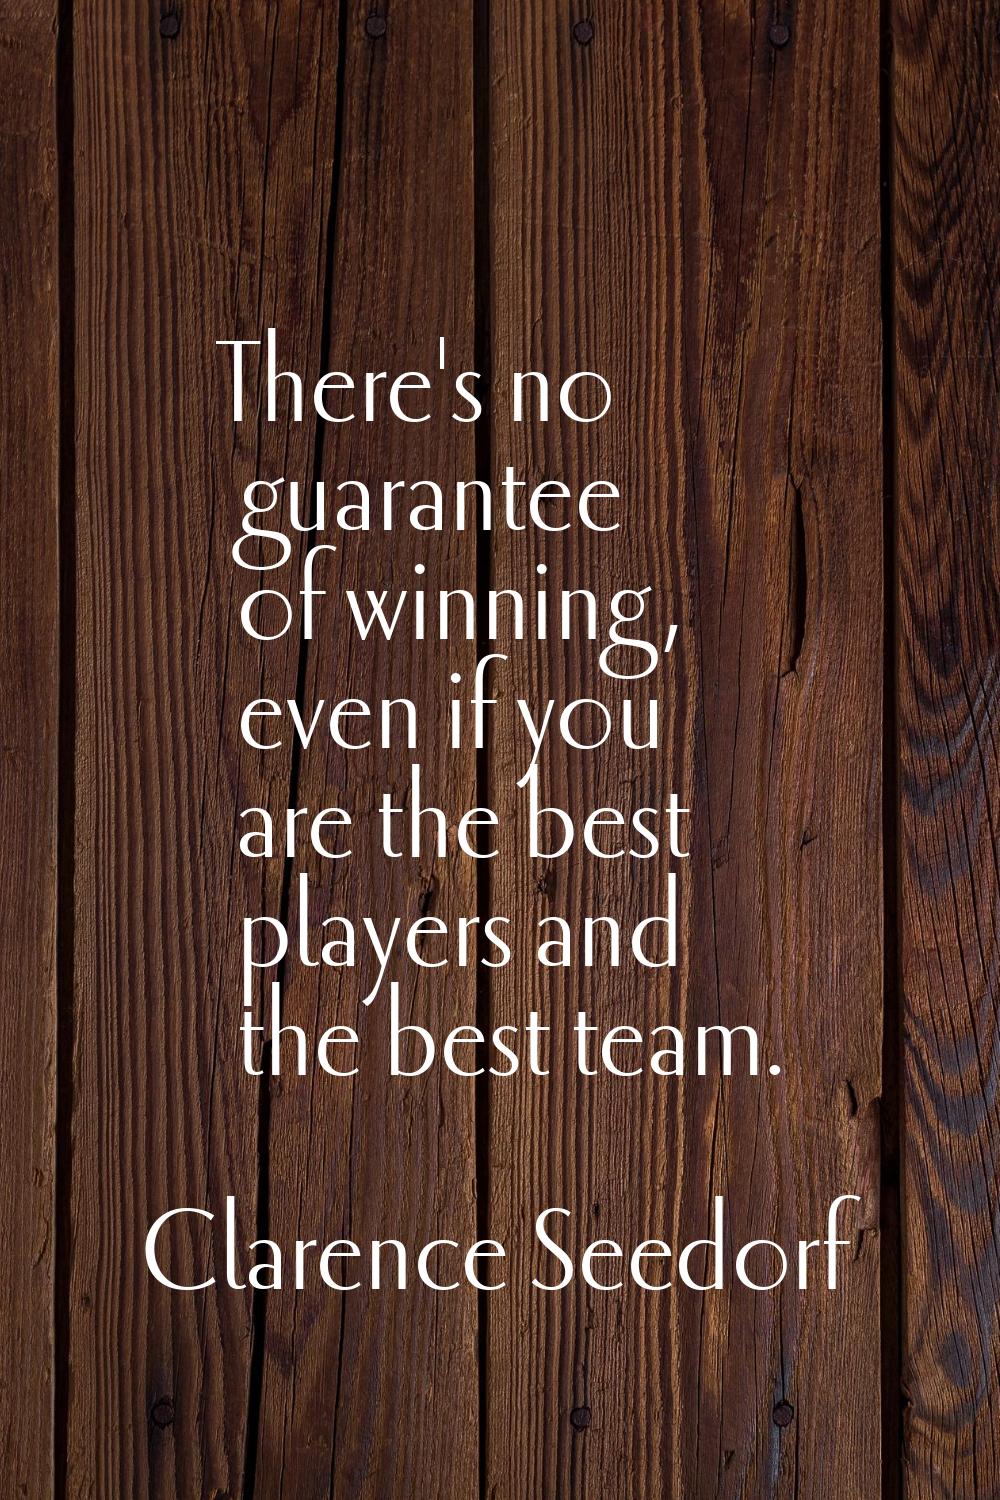 There's no guarantee of winning, even if you are the best players and the best team.